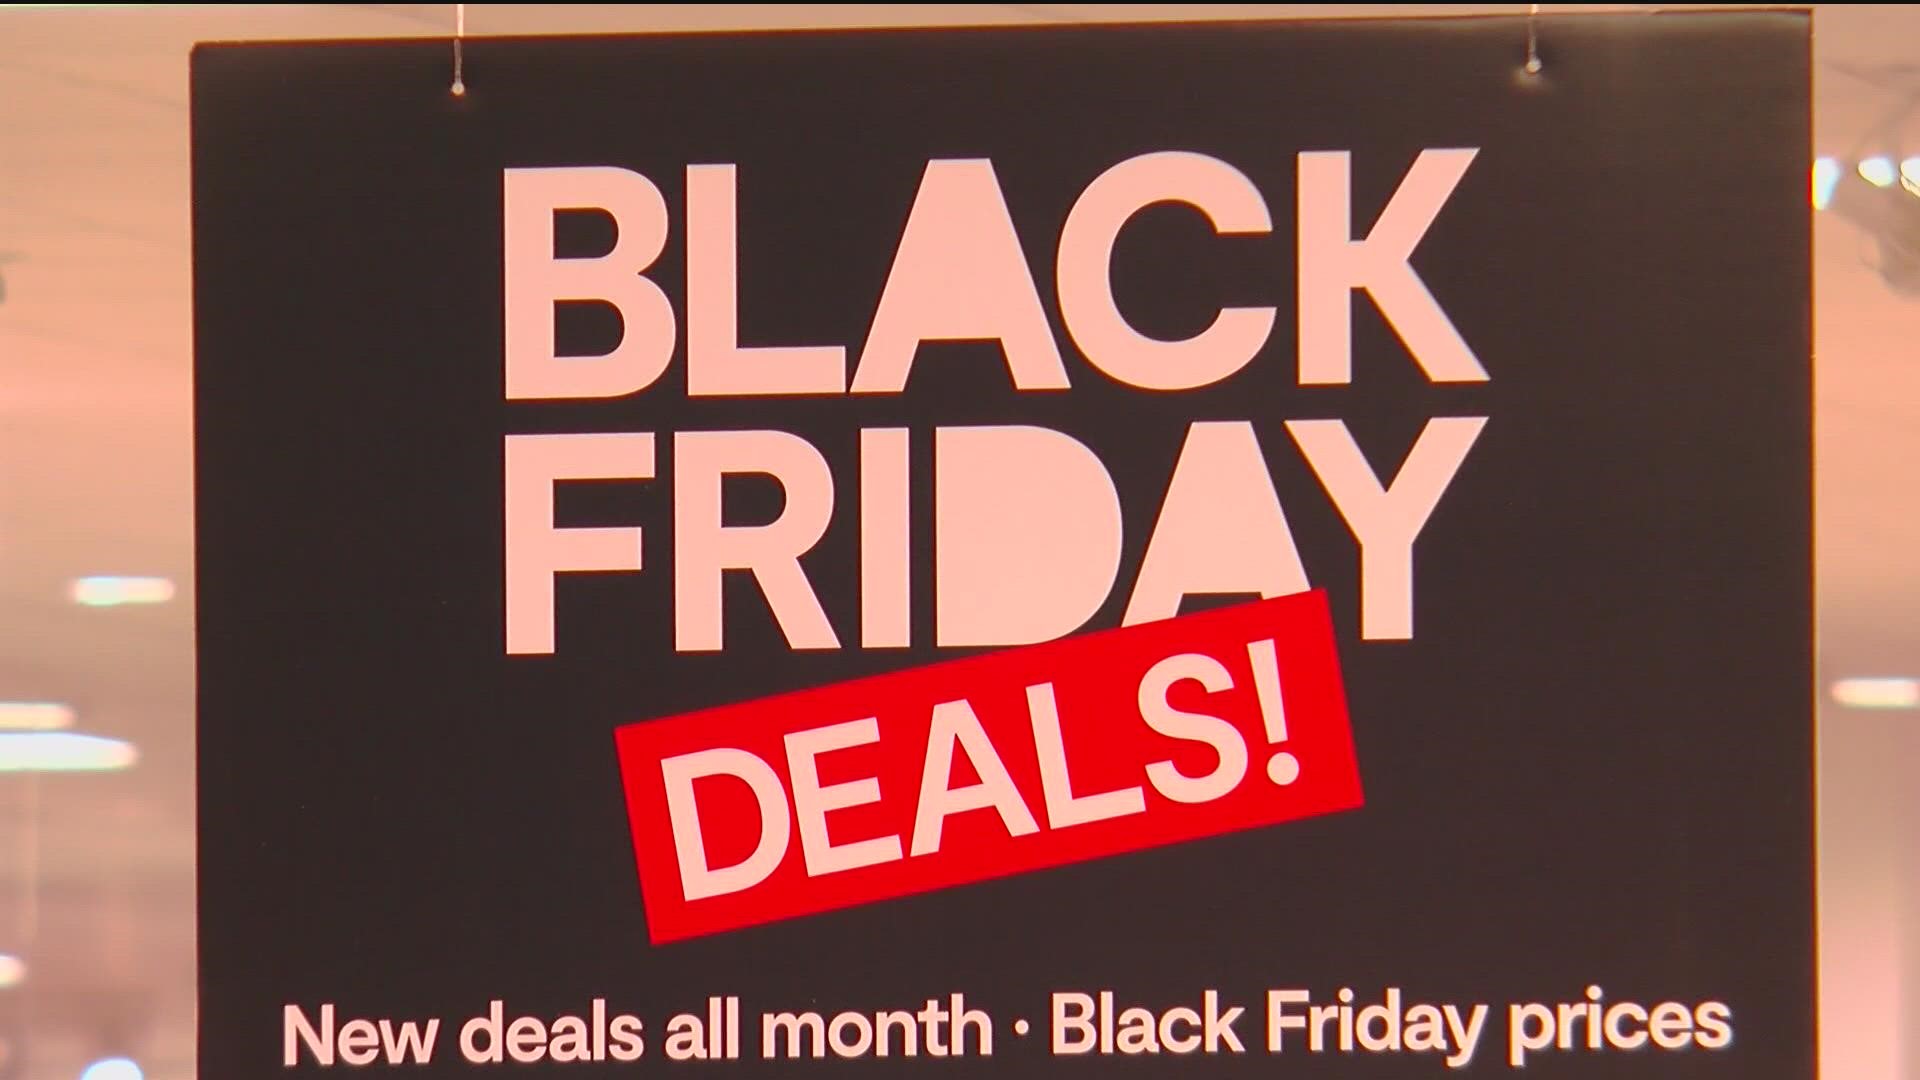 Black Friday is right around the corner, and CBS 8's Danamarie McNicholl knows precisely where the best Black Friday deals around the county are popping up.